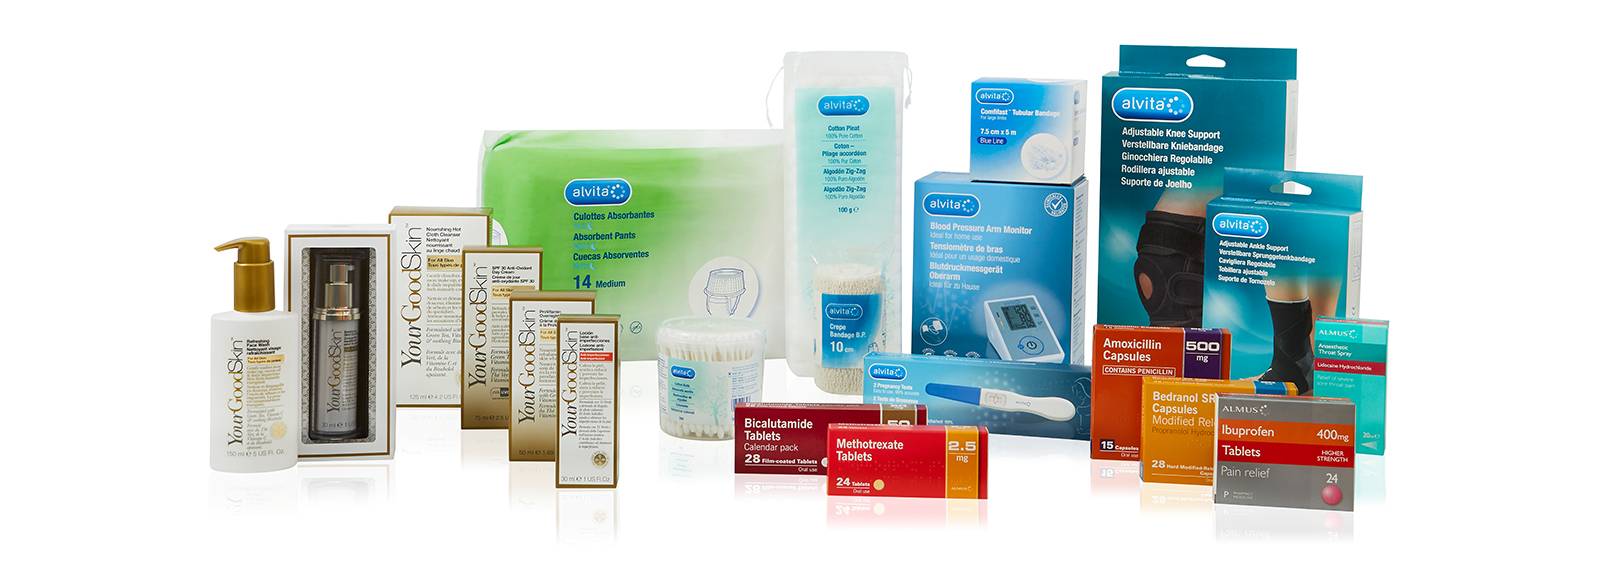 Our exclusive, Pharmacy-only products